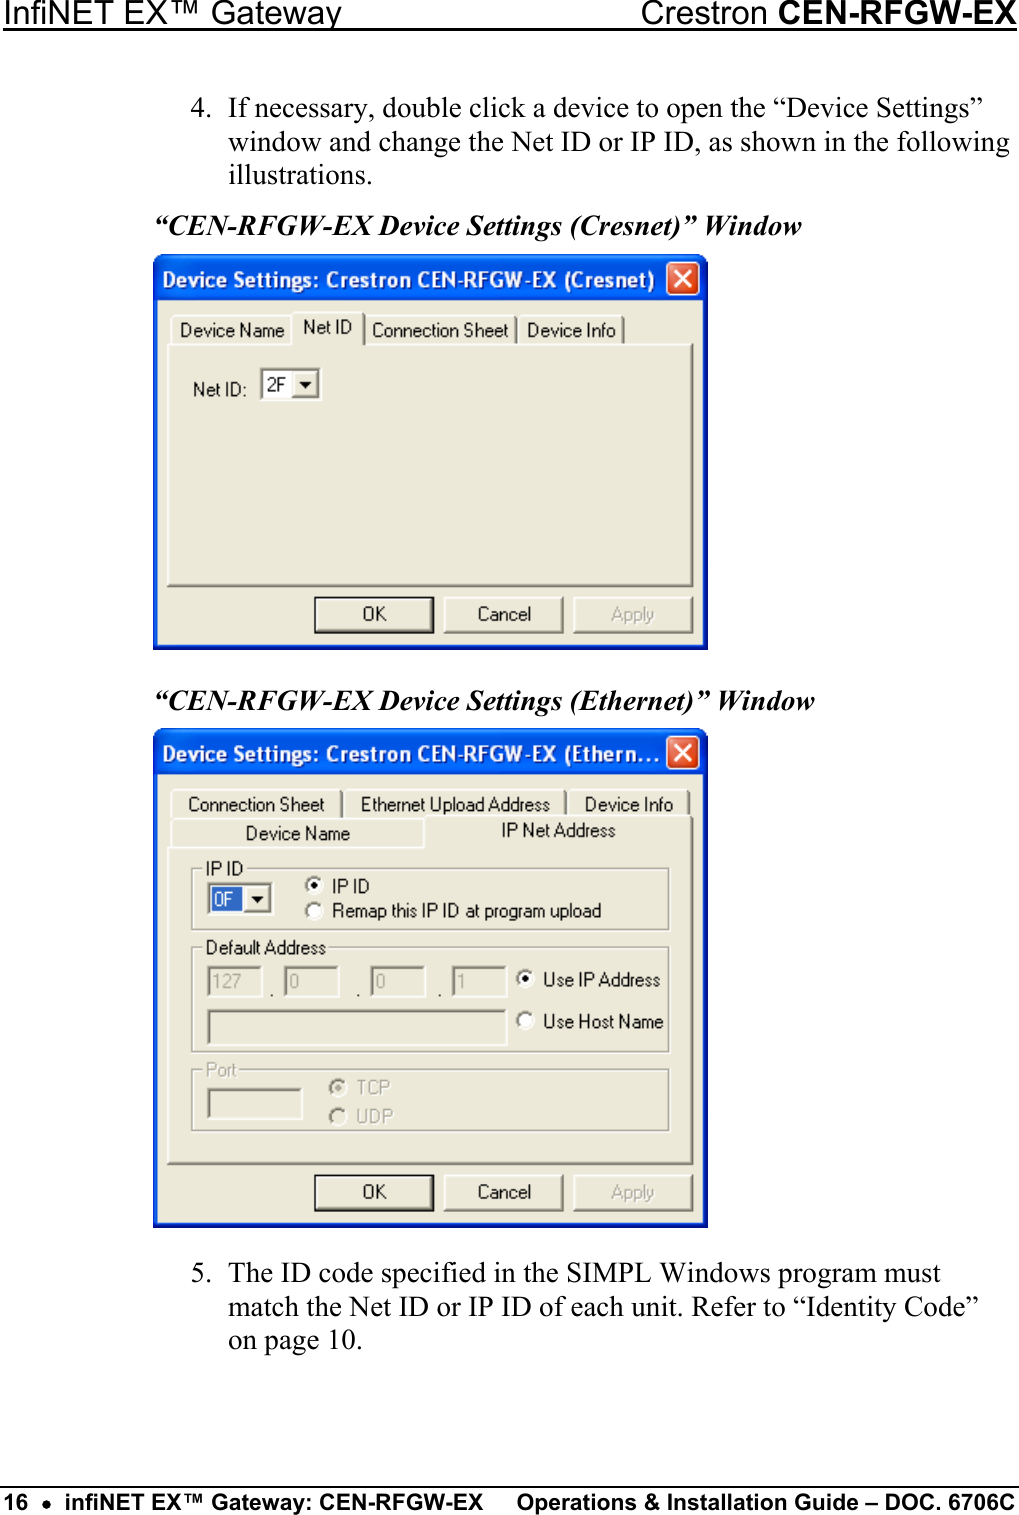 InfiNET EX™ Gateway  Crestron CEN-RFGW-EX 4.  If necessary, double click a device to open the “Device Settings” window and change the Net ID or IP ID, as shown in the following illustrations. “CEN-RFGW-EX Device Settings (Cresnet)” Window  “CEN-RFGW-EX Device Settings (Ethernet)” Window  5.  The ID code specified in the SIMPL Windows program must match the Net ID or IP ID of each unit. Refer to “Identity Code” on page 10.   16  •  infiNET EX™ Gateway: CEN-RFGW-EX  Operations &amp; Installation Guide – DOC. 6706C 